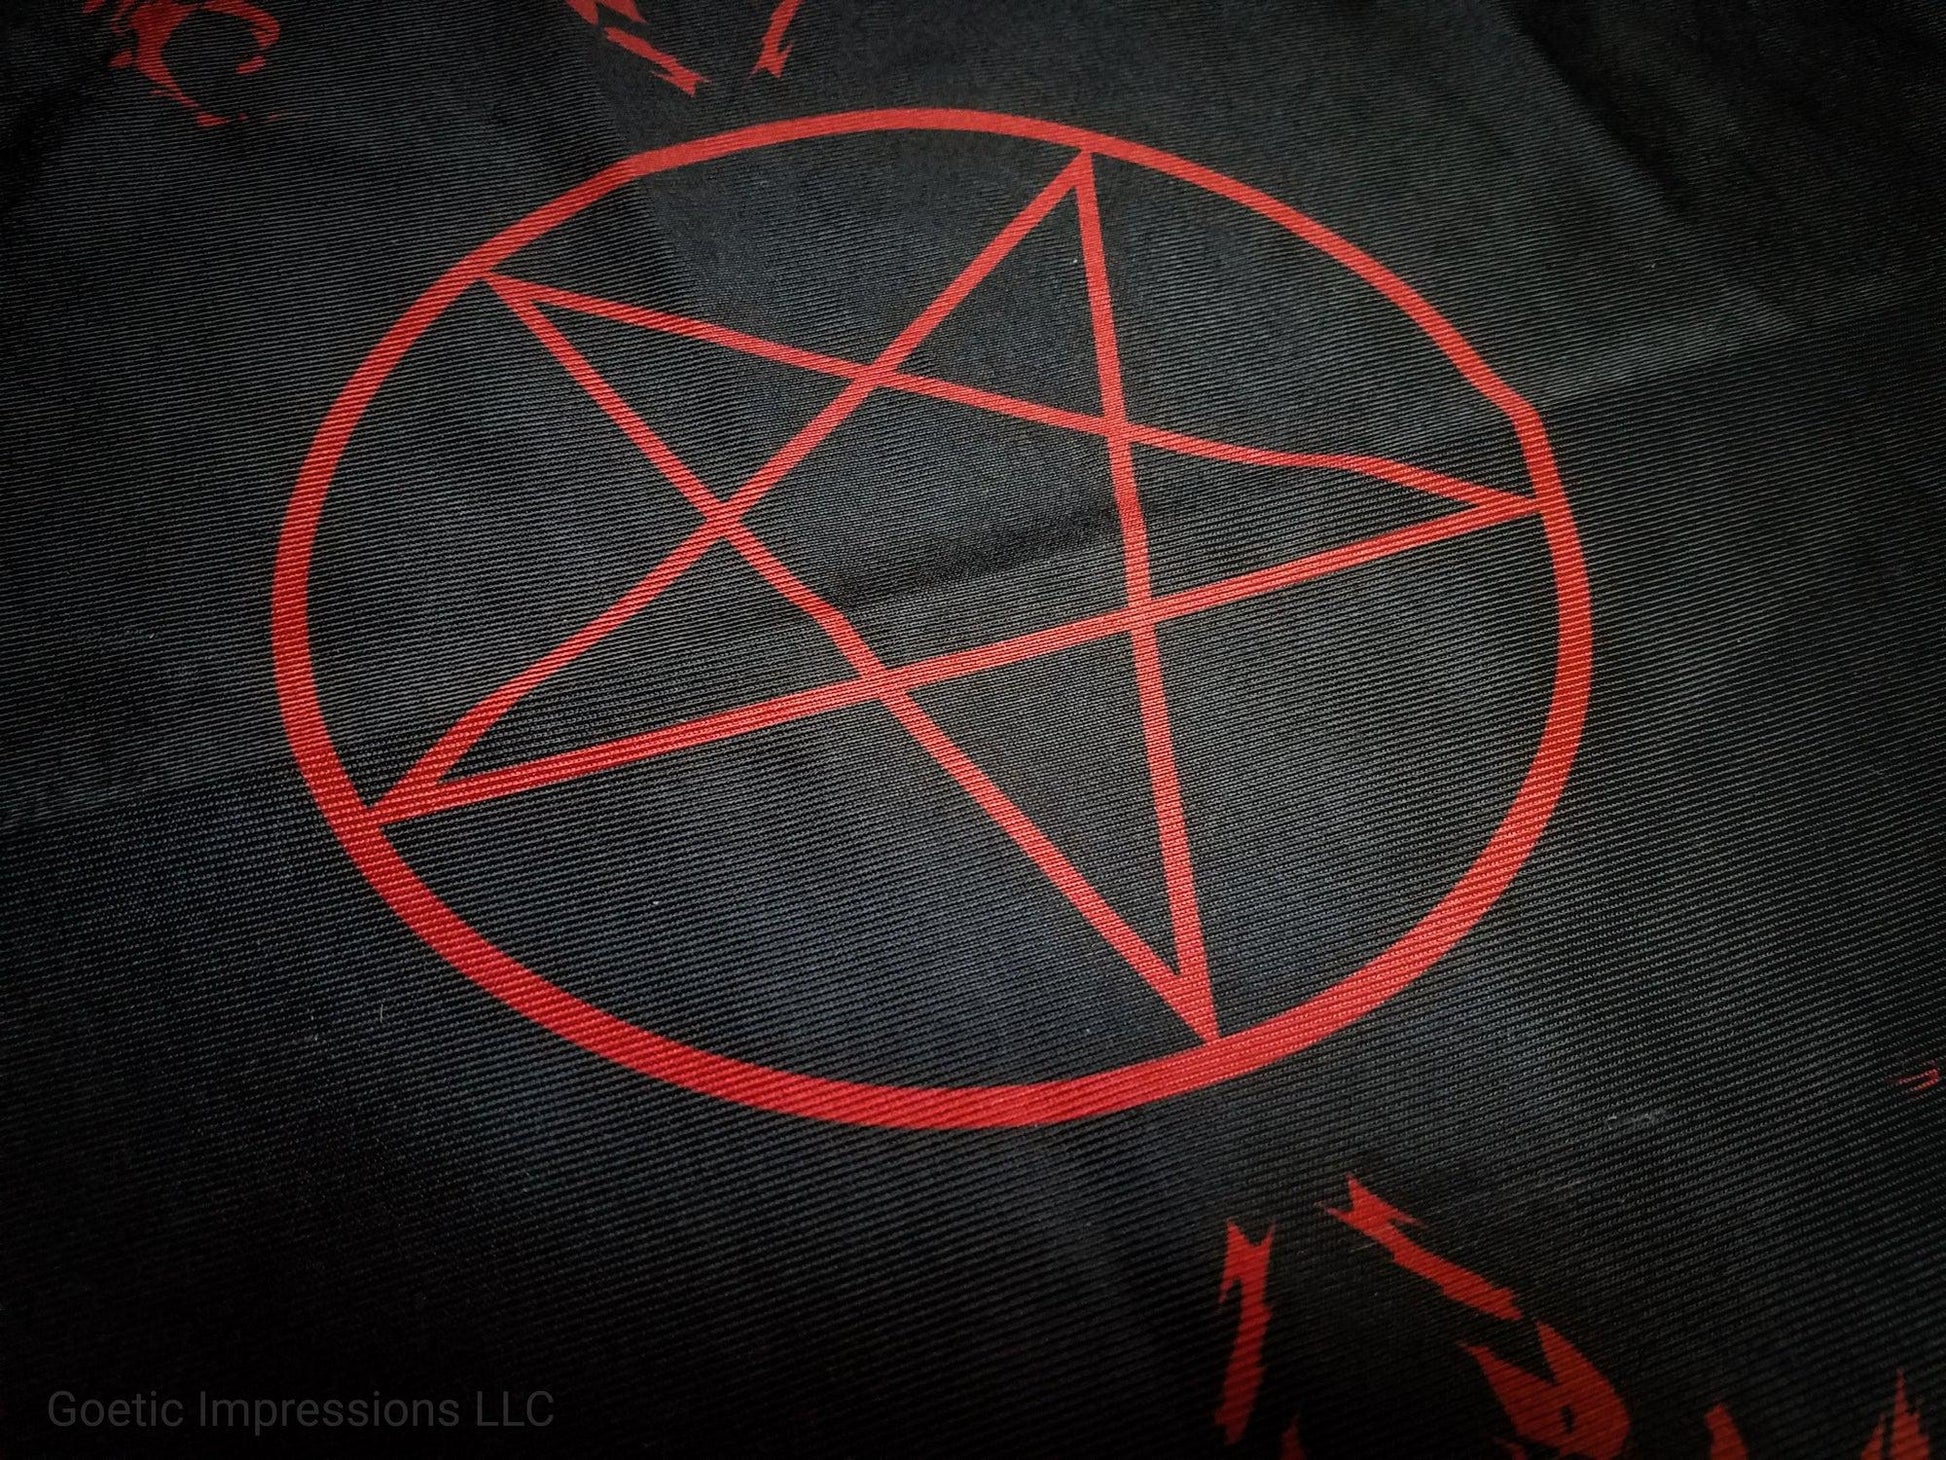 Black and Red Pentacle altar cloth